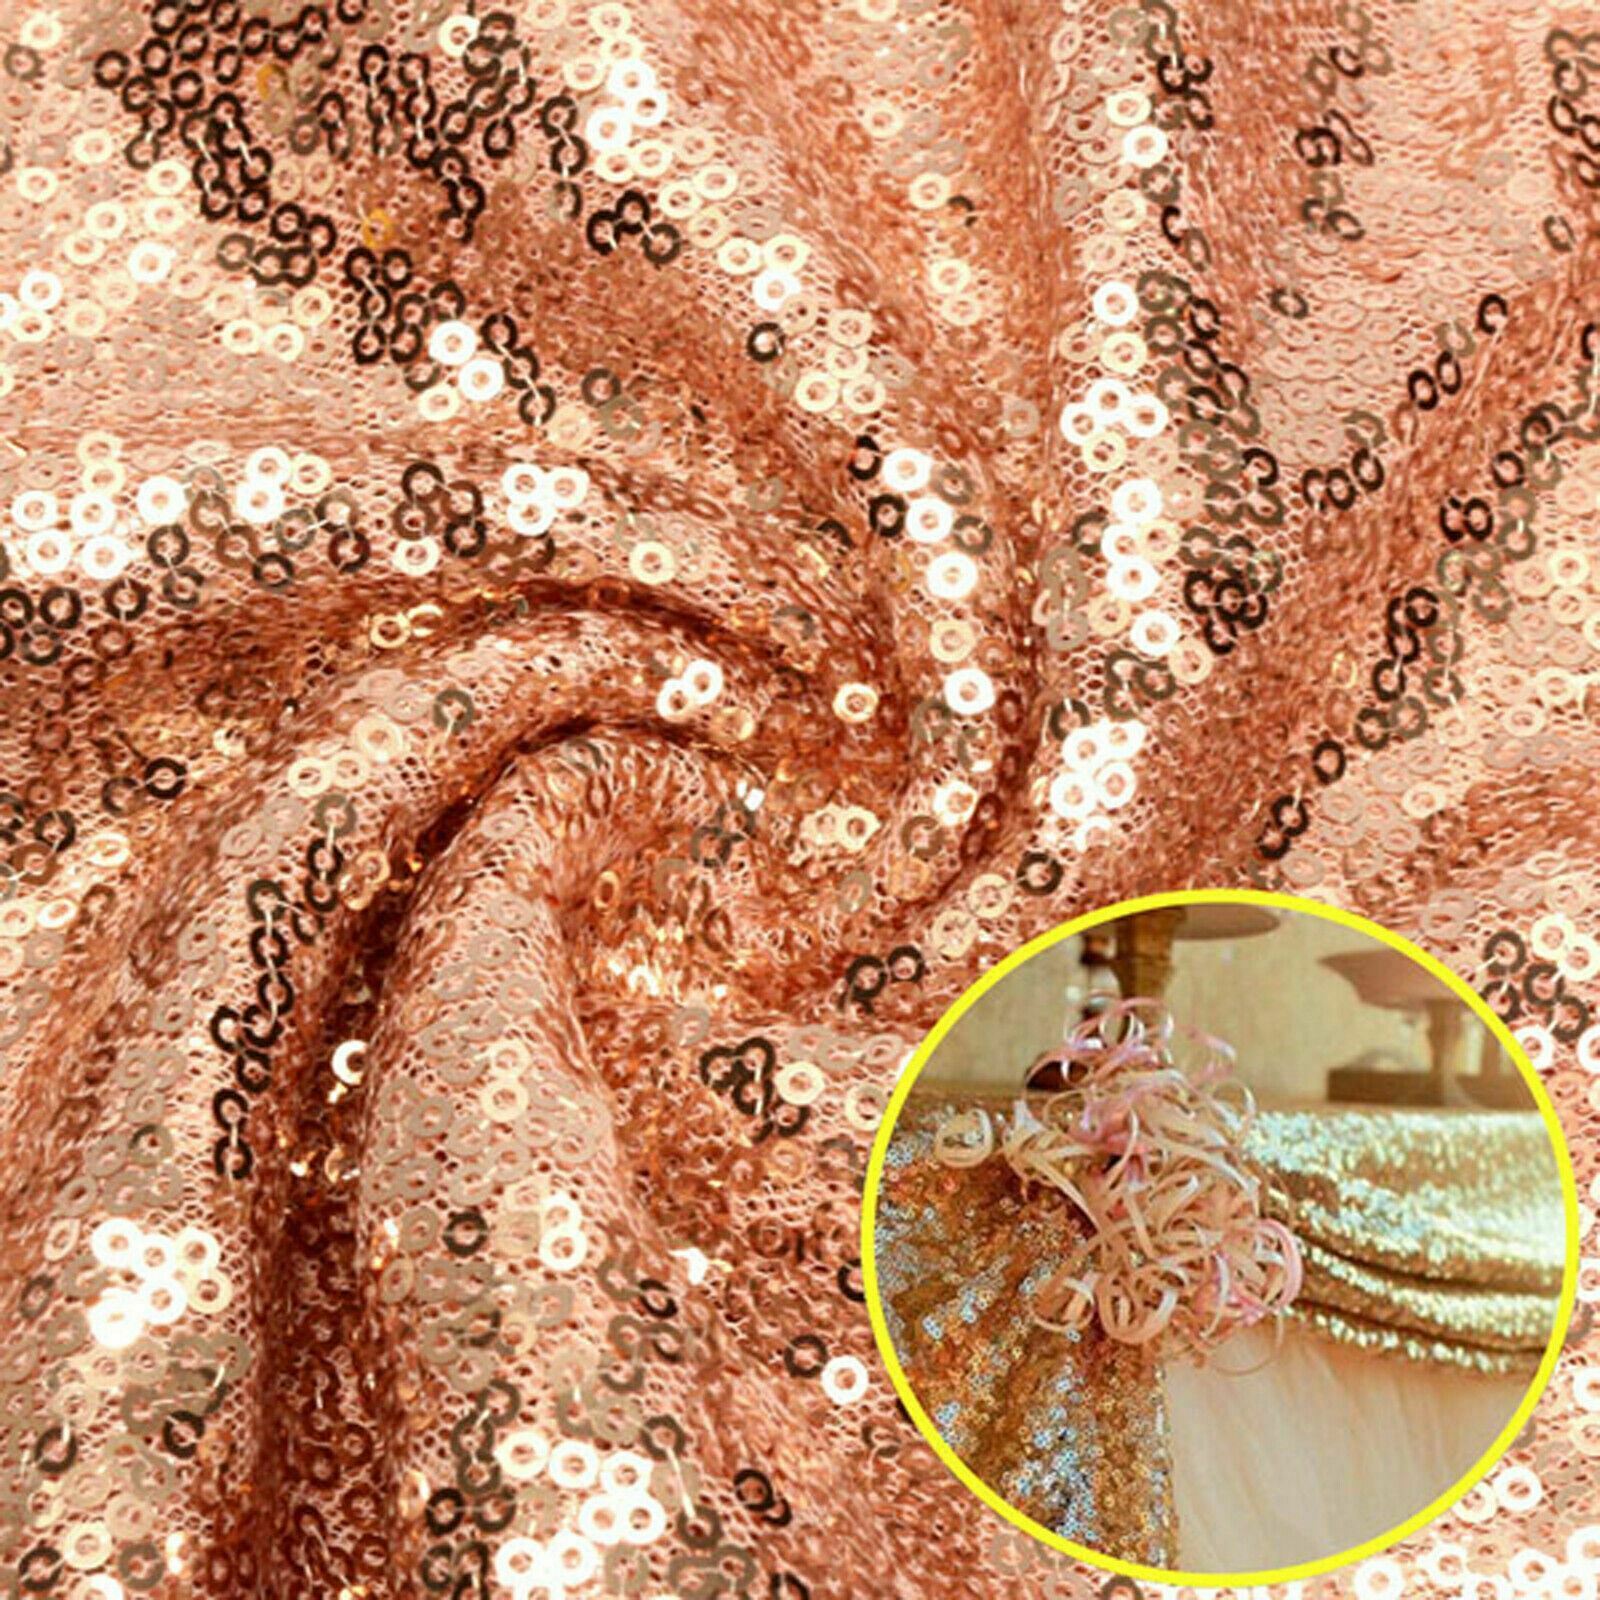 30x180cm Rose Golden Sequin Table Runner Wedding Party Cloth Event Decoration